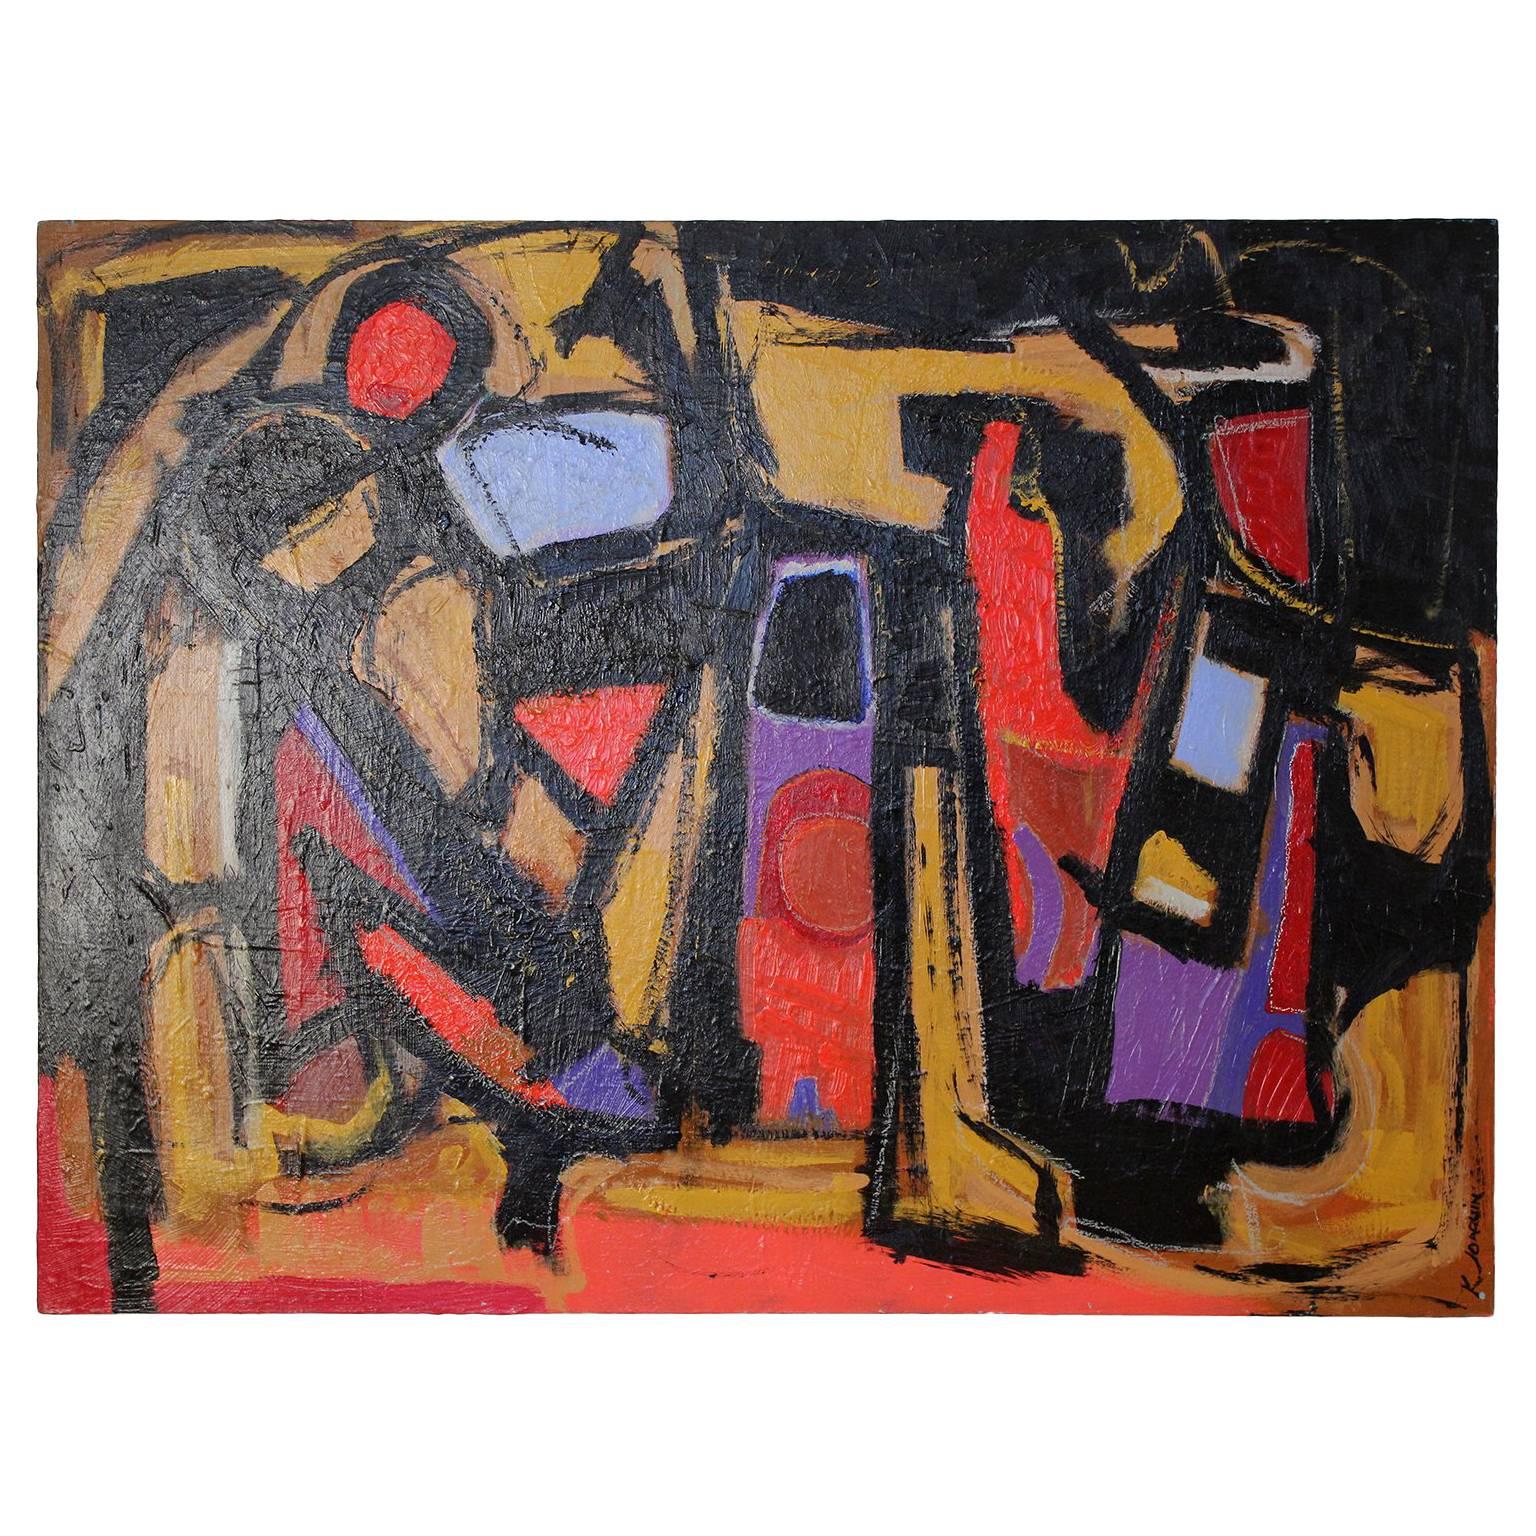 Ken Joaquin Original Abstract Oil Painting "Hiding in the Shadows"